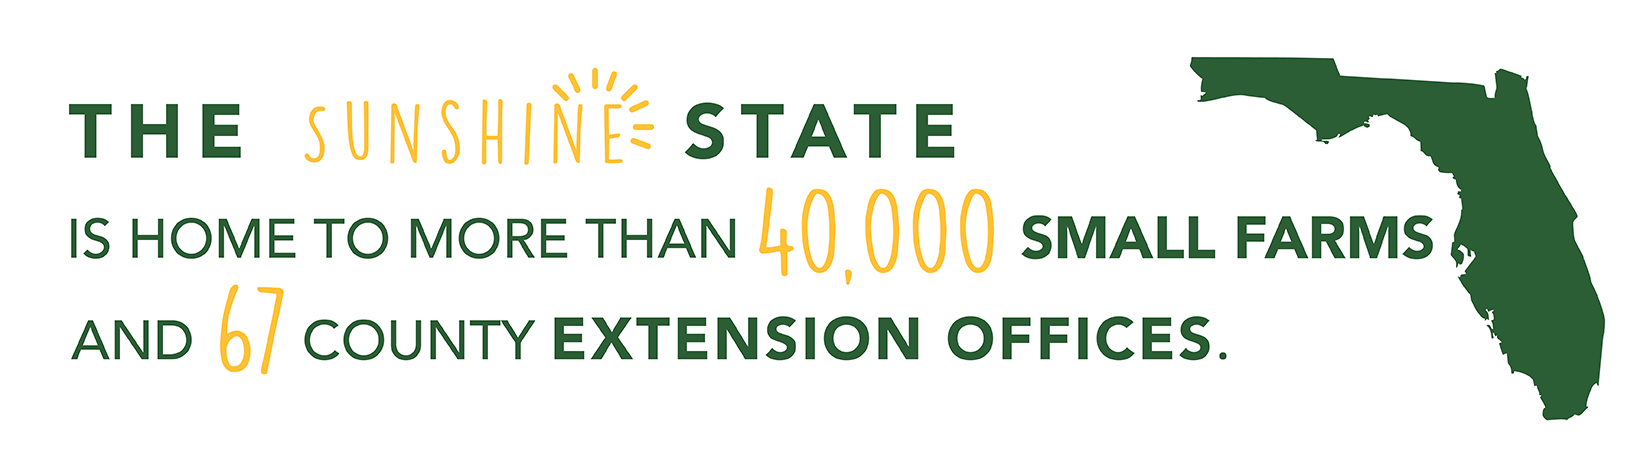 The sunshine state is home to more than 40,000 small farms and 67 county extension offices